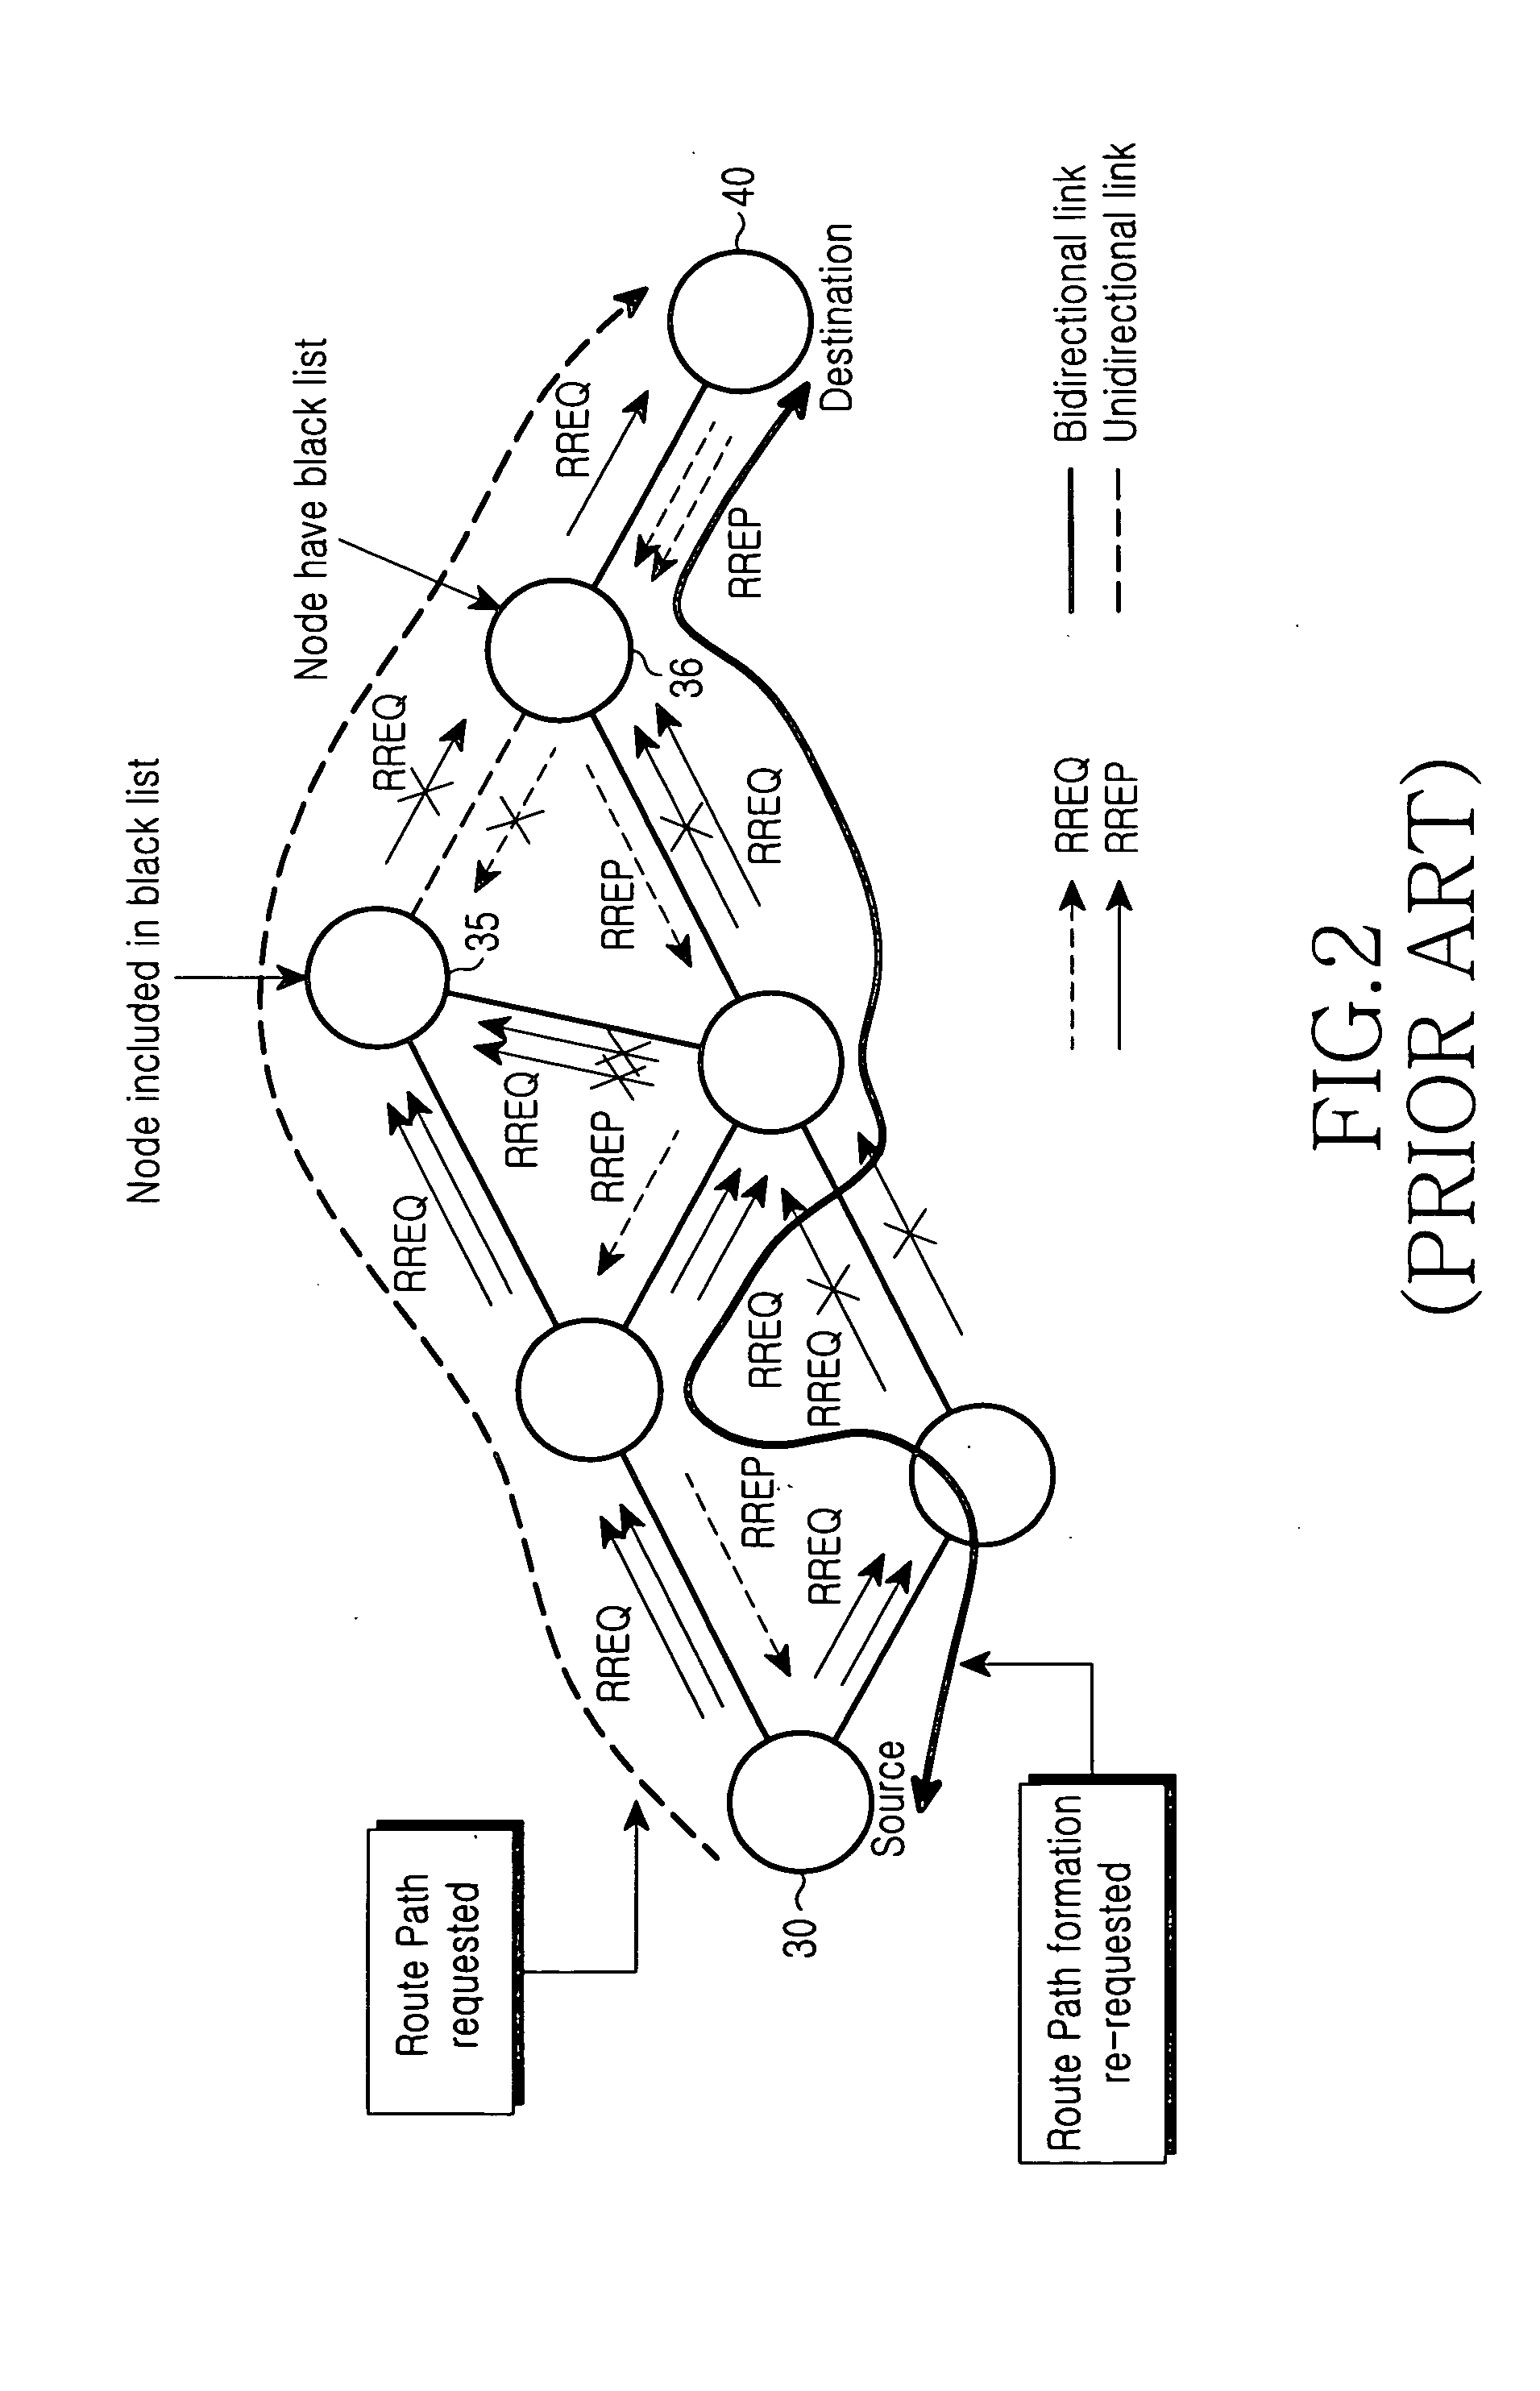 Method for setting up route path through route discovery in a mobile ad hoc network using partial route discovery